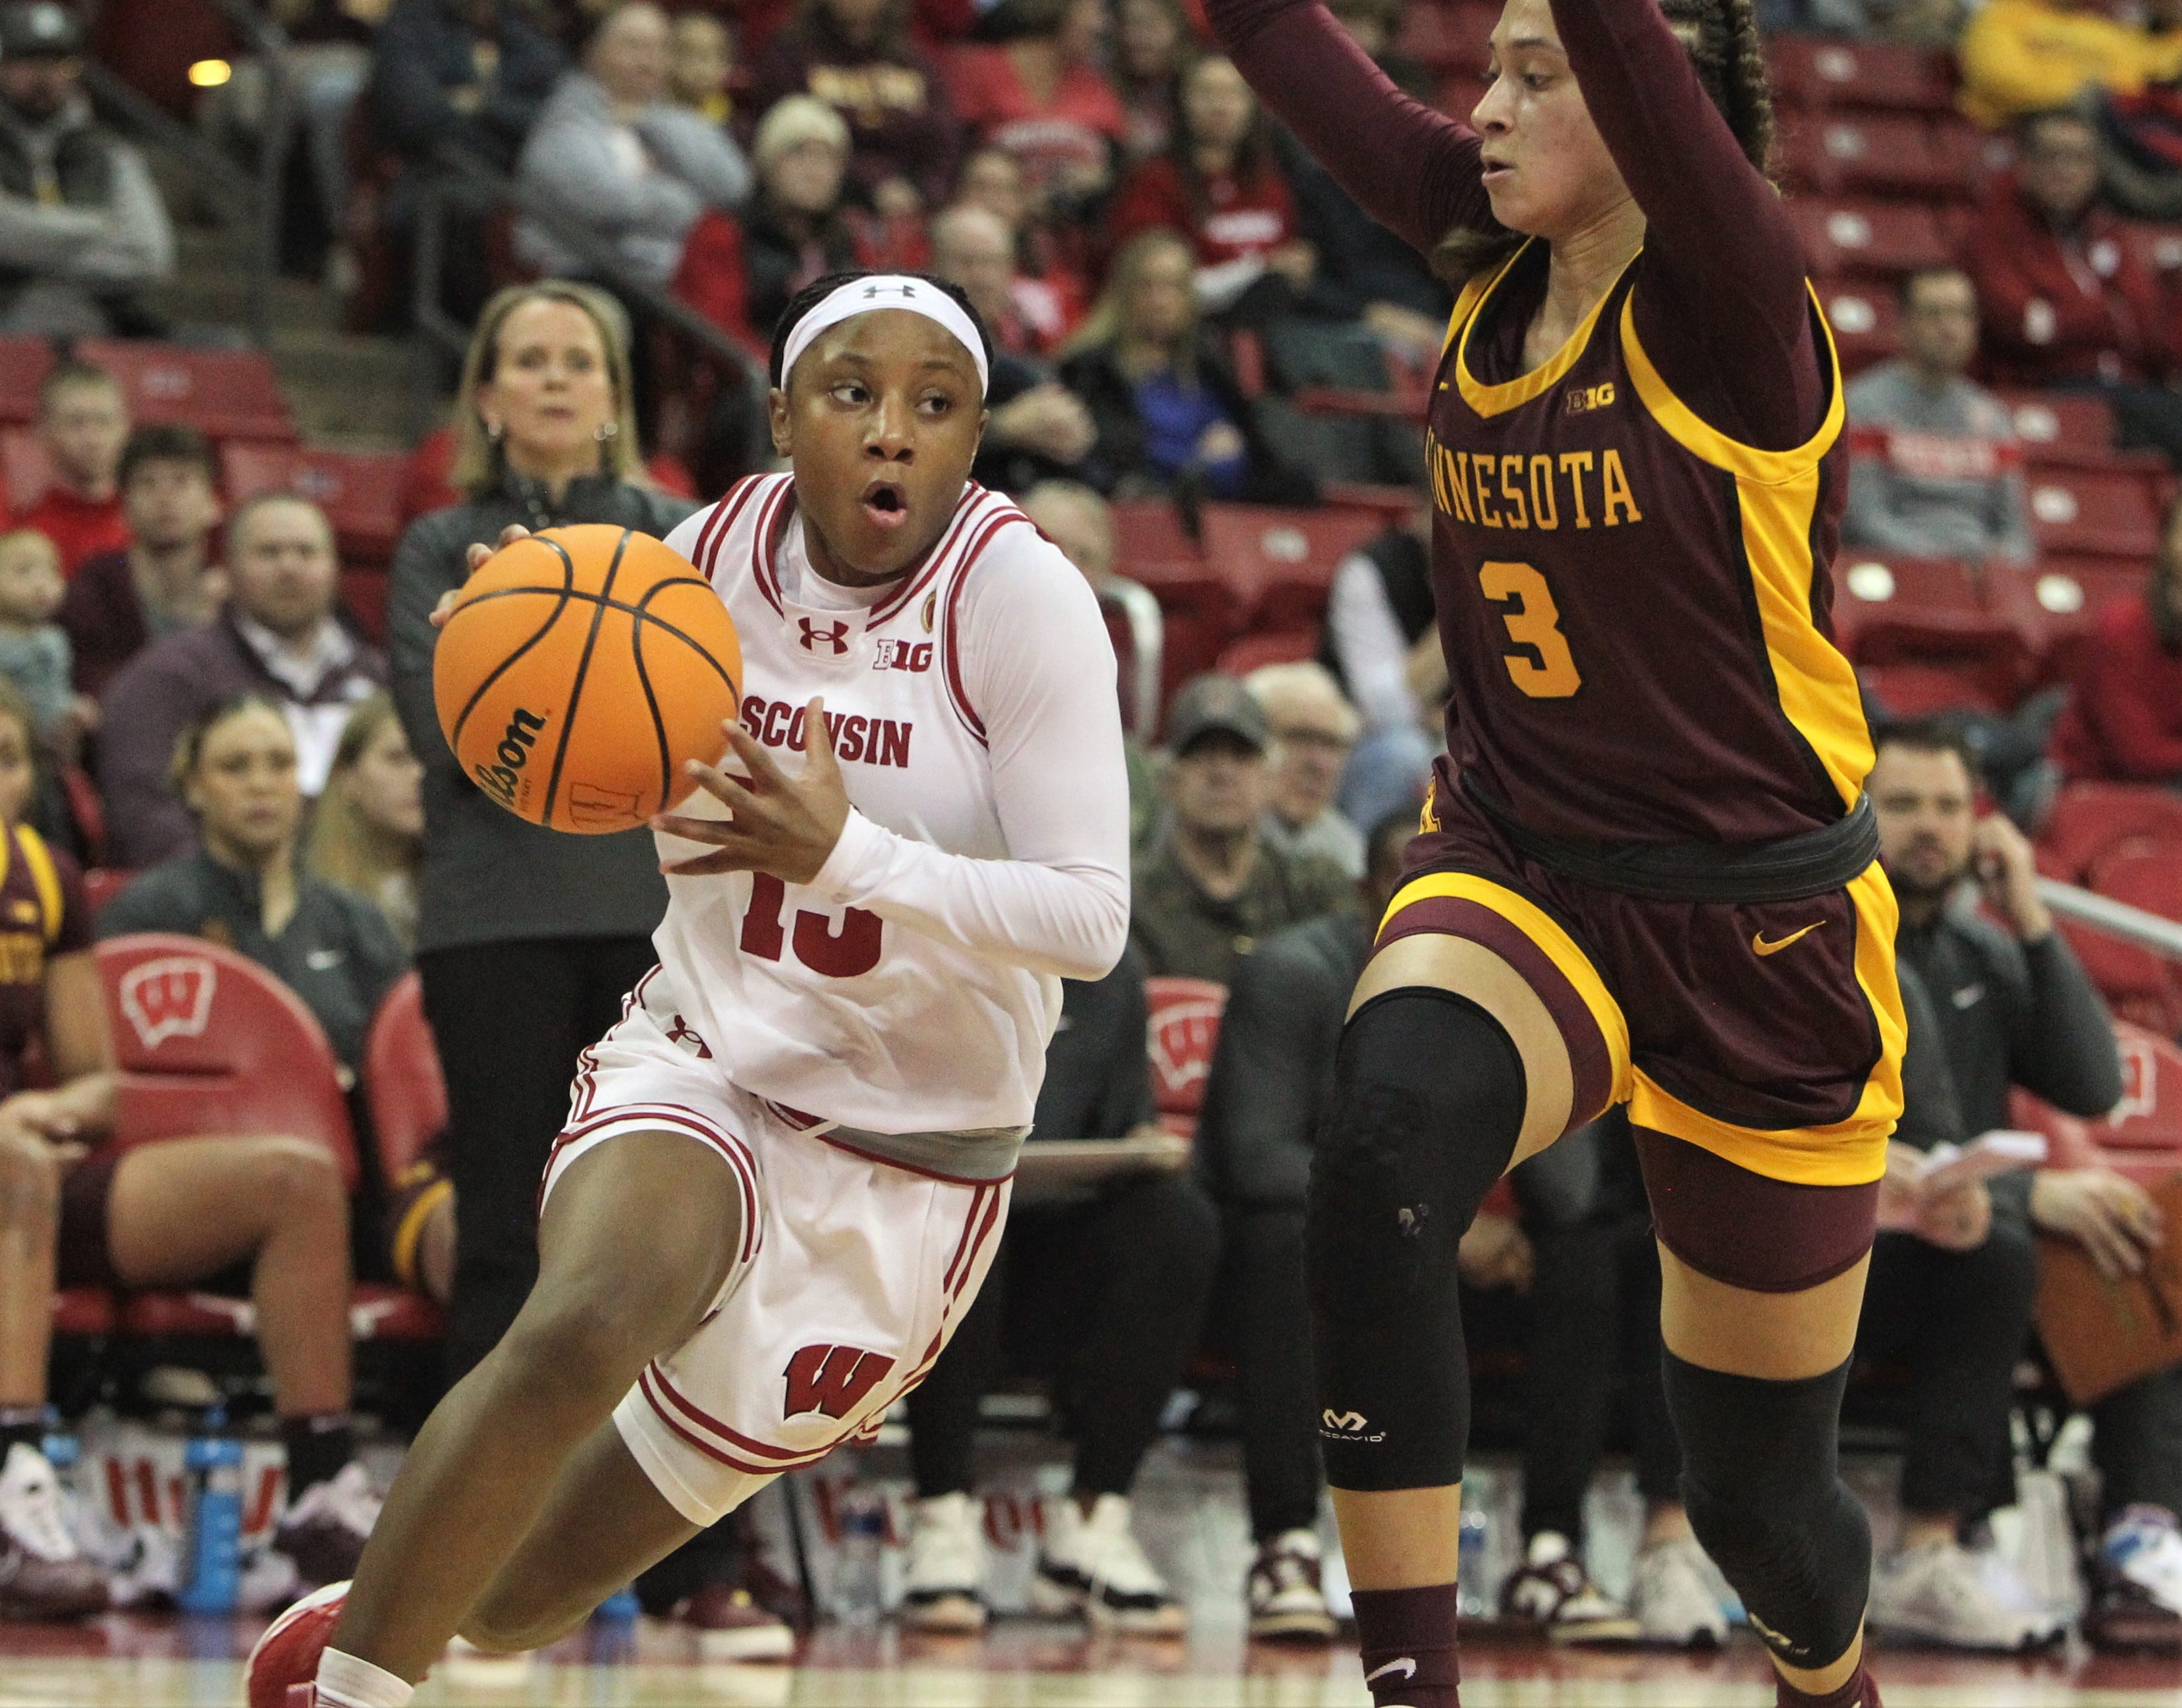 serah williams records double-double, wisconsin women's basketball outlasts minnesota